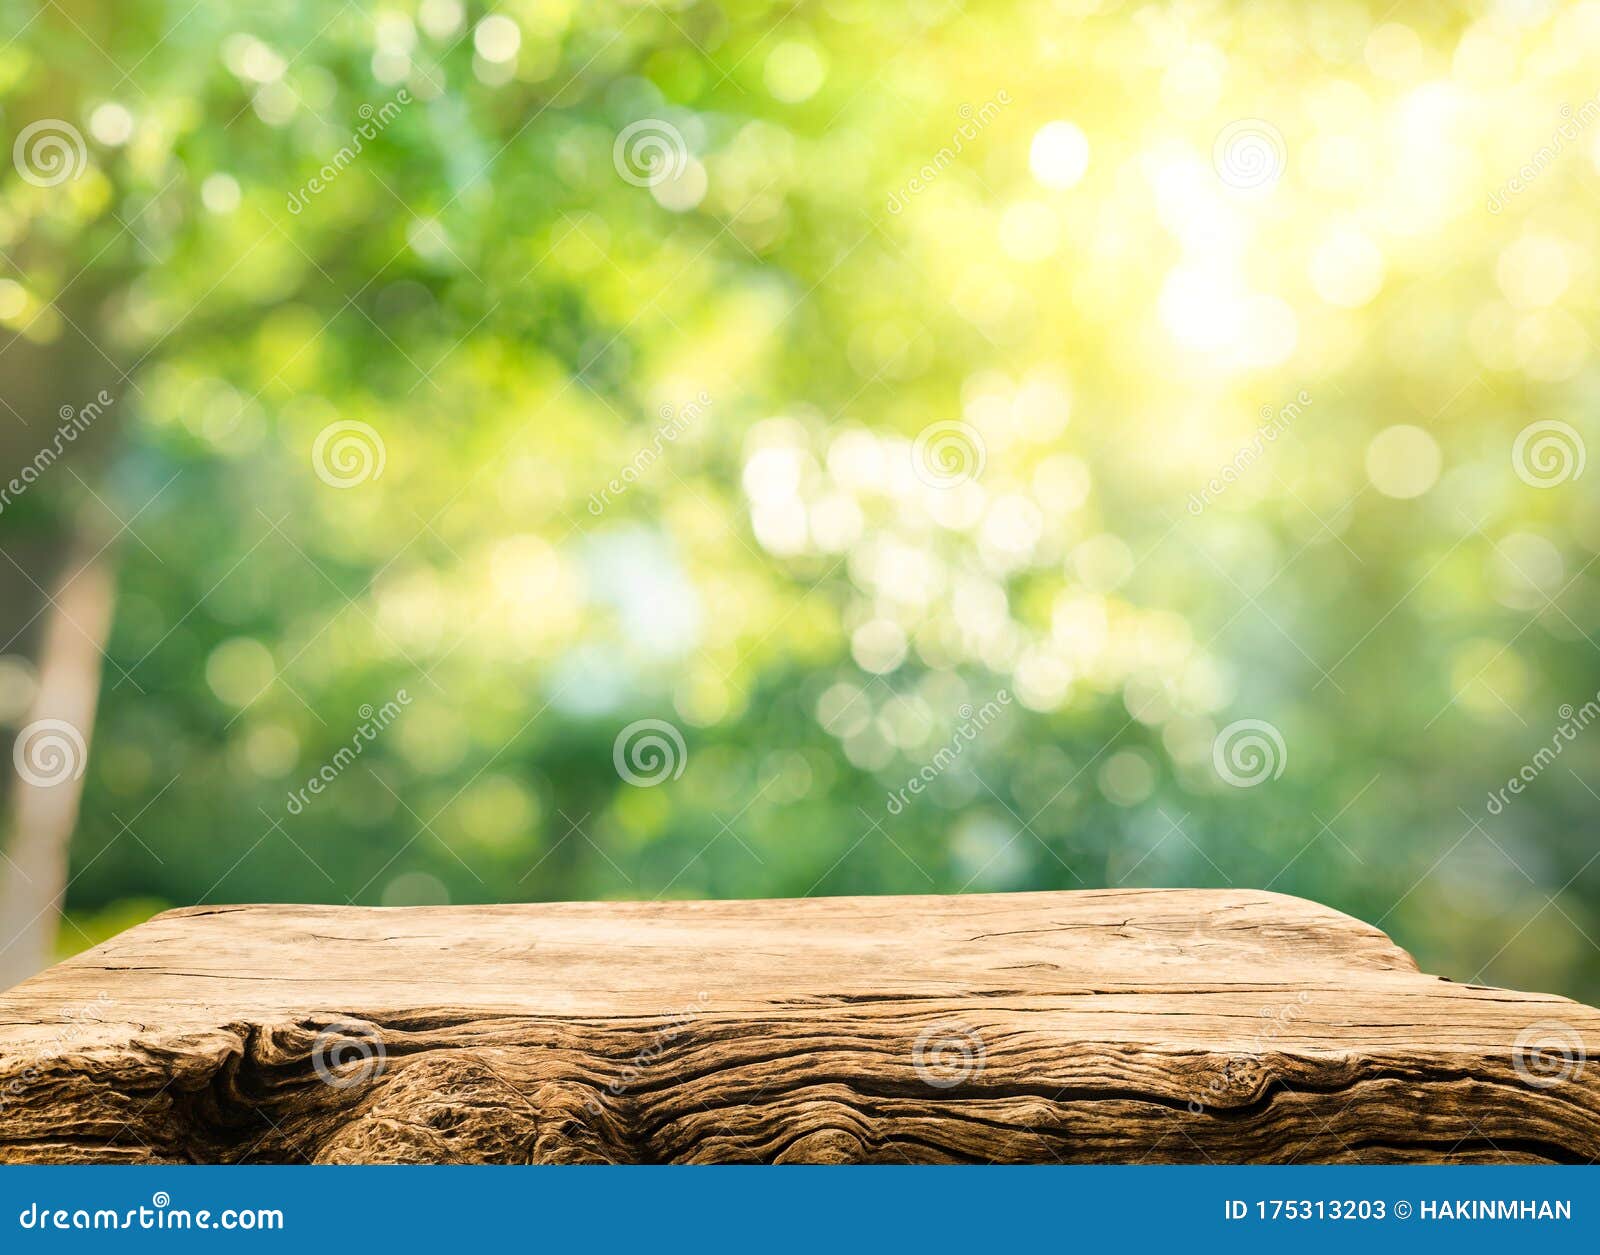 real wood table top texture on blur leaf tree garden background.for create product display